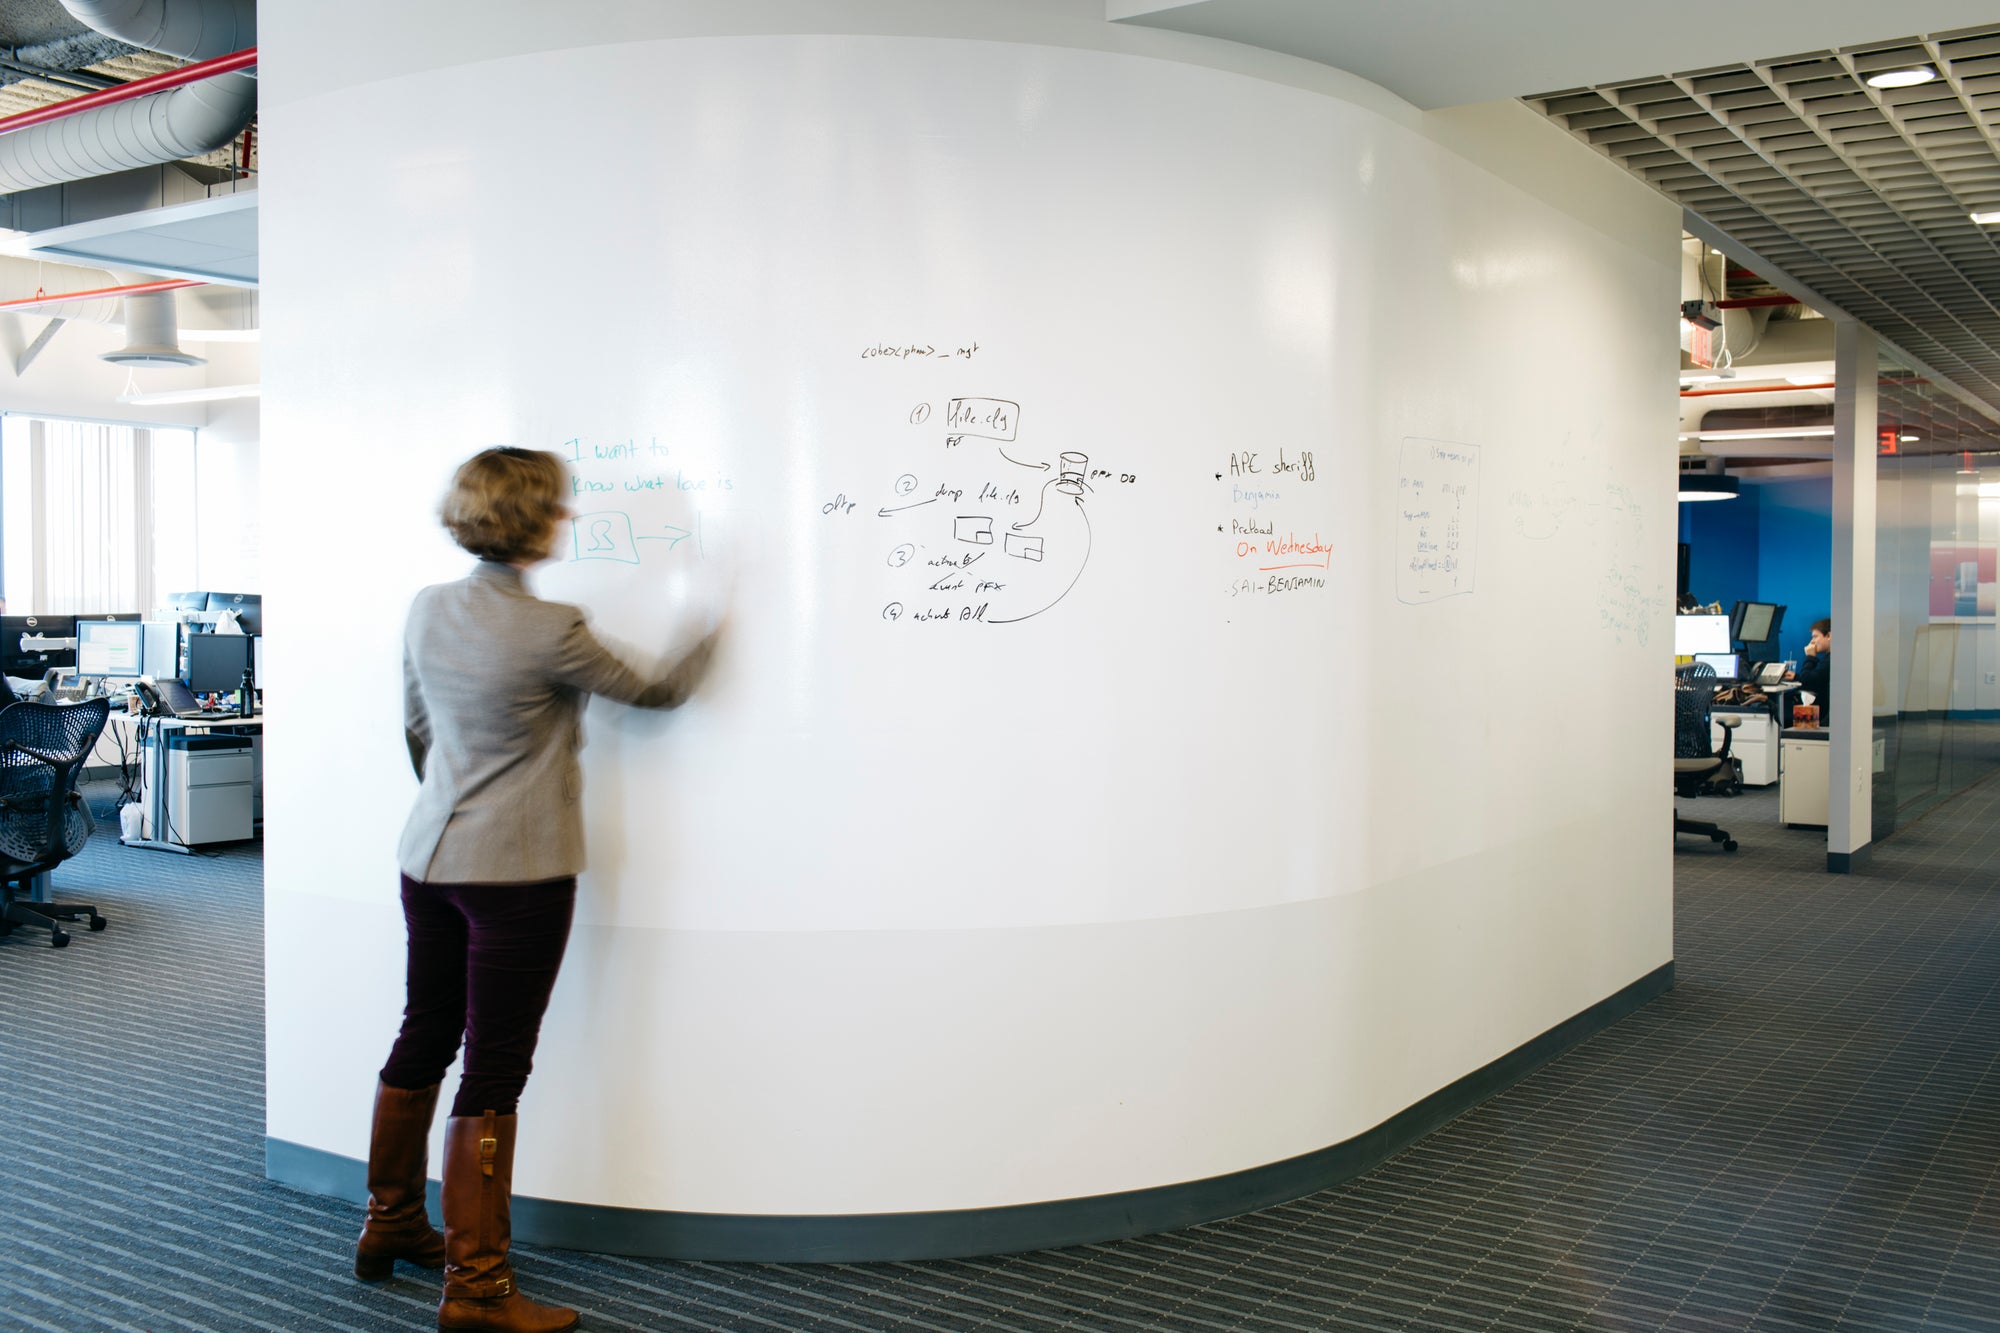 Dry Erase Wall Paint  Whiteboard Paint for Walls – Writeyboard